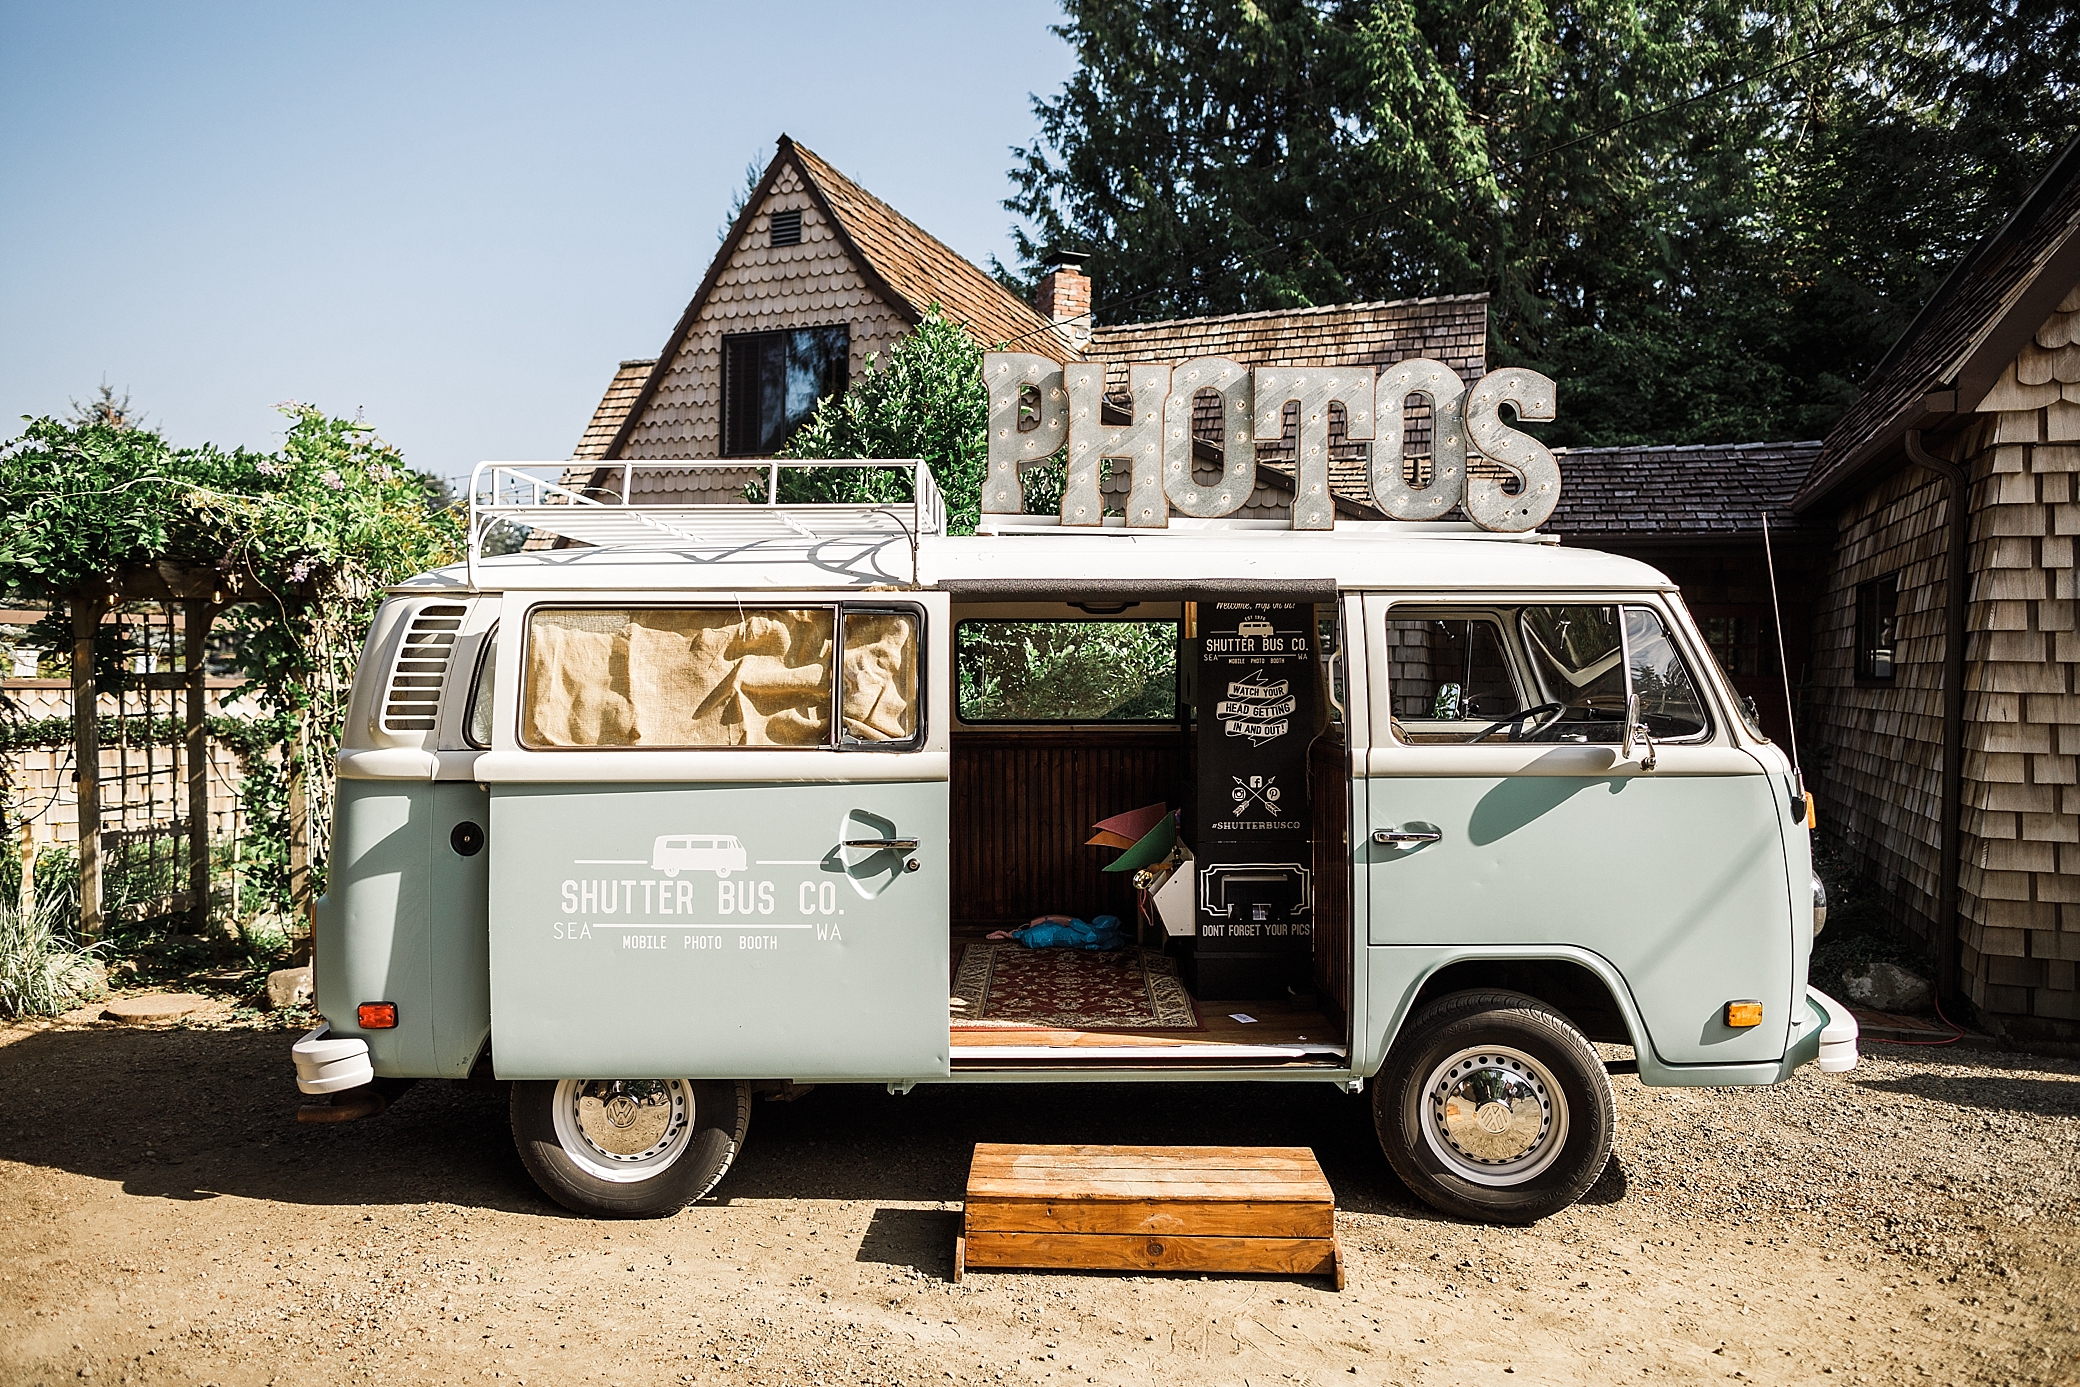 Shutter Bus Co Photobooth out of Seattle, WA | Seattle Wedding Photo Booth | Megan Montalvo Photography